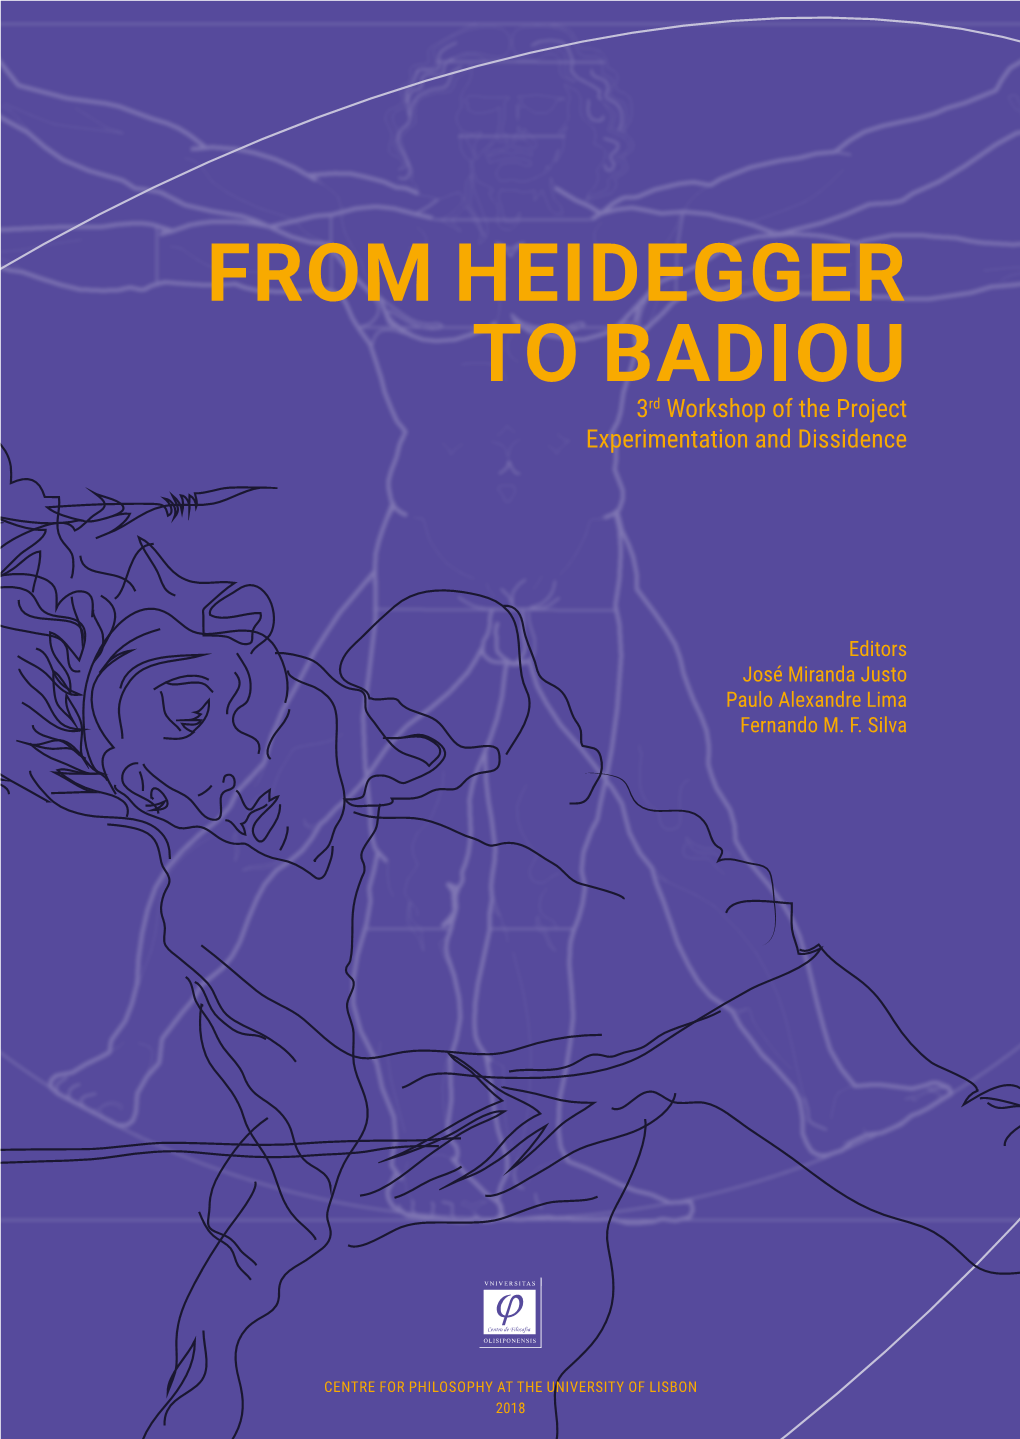 From Heidegger to Badiou. 3Rd Workshop of the Project